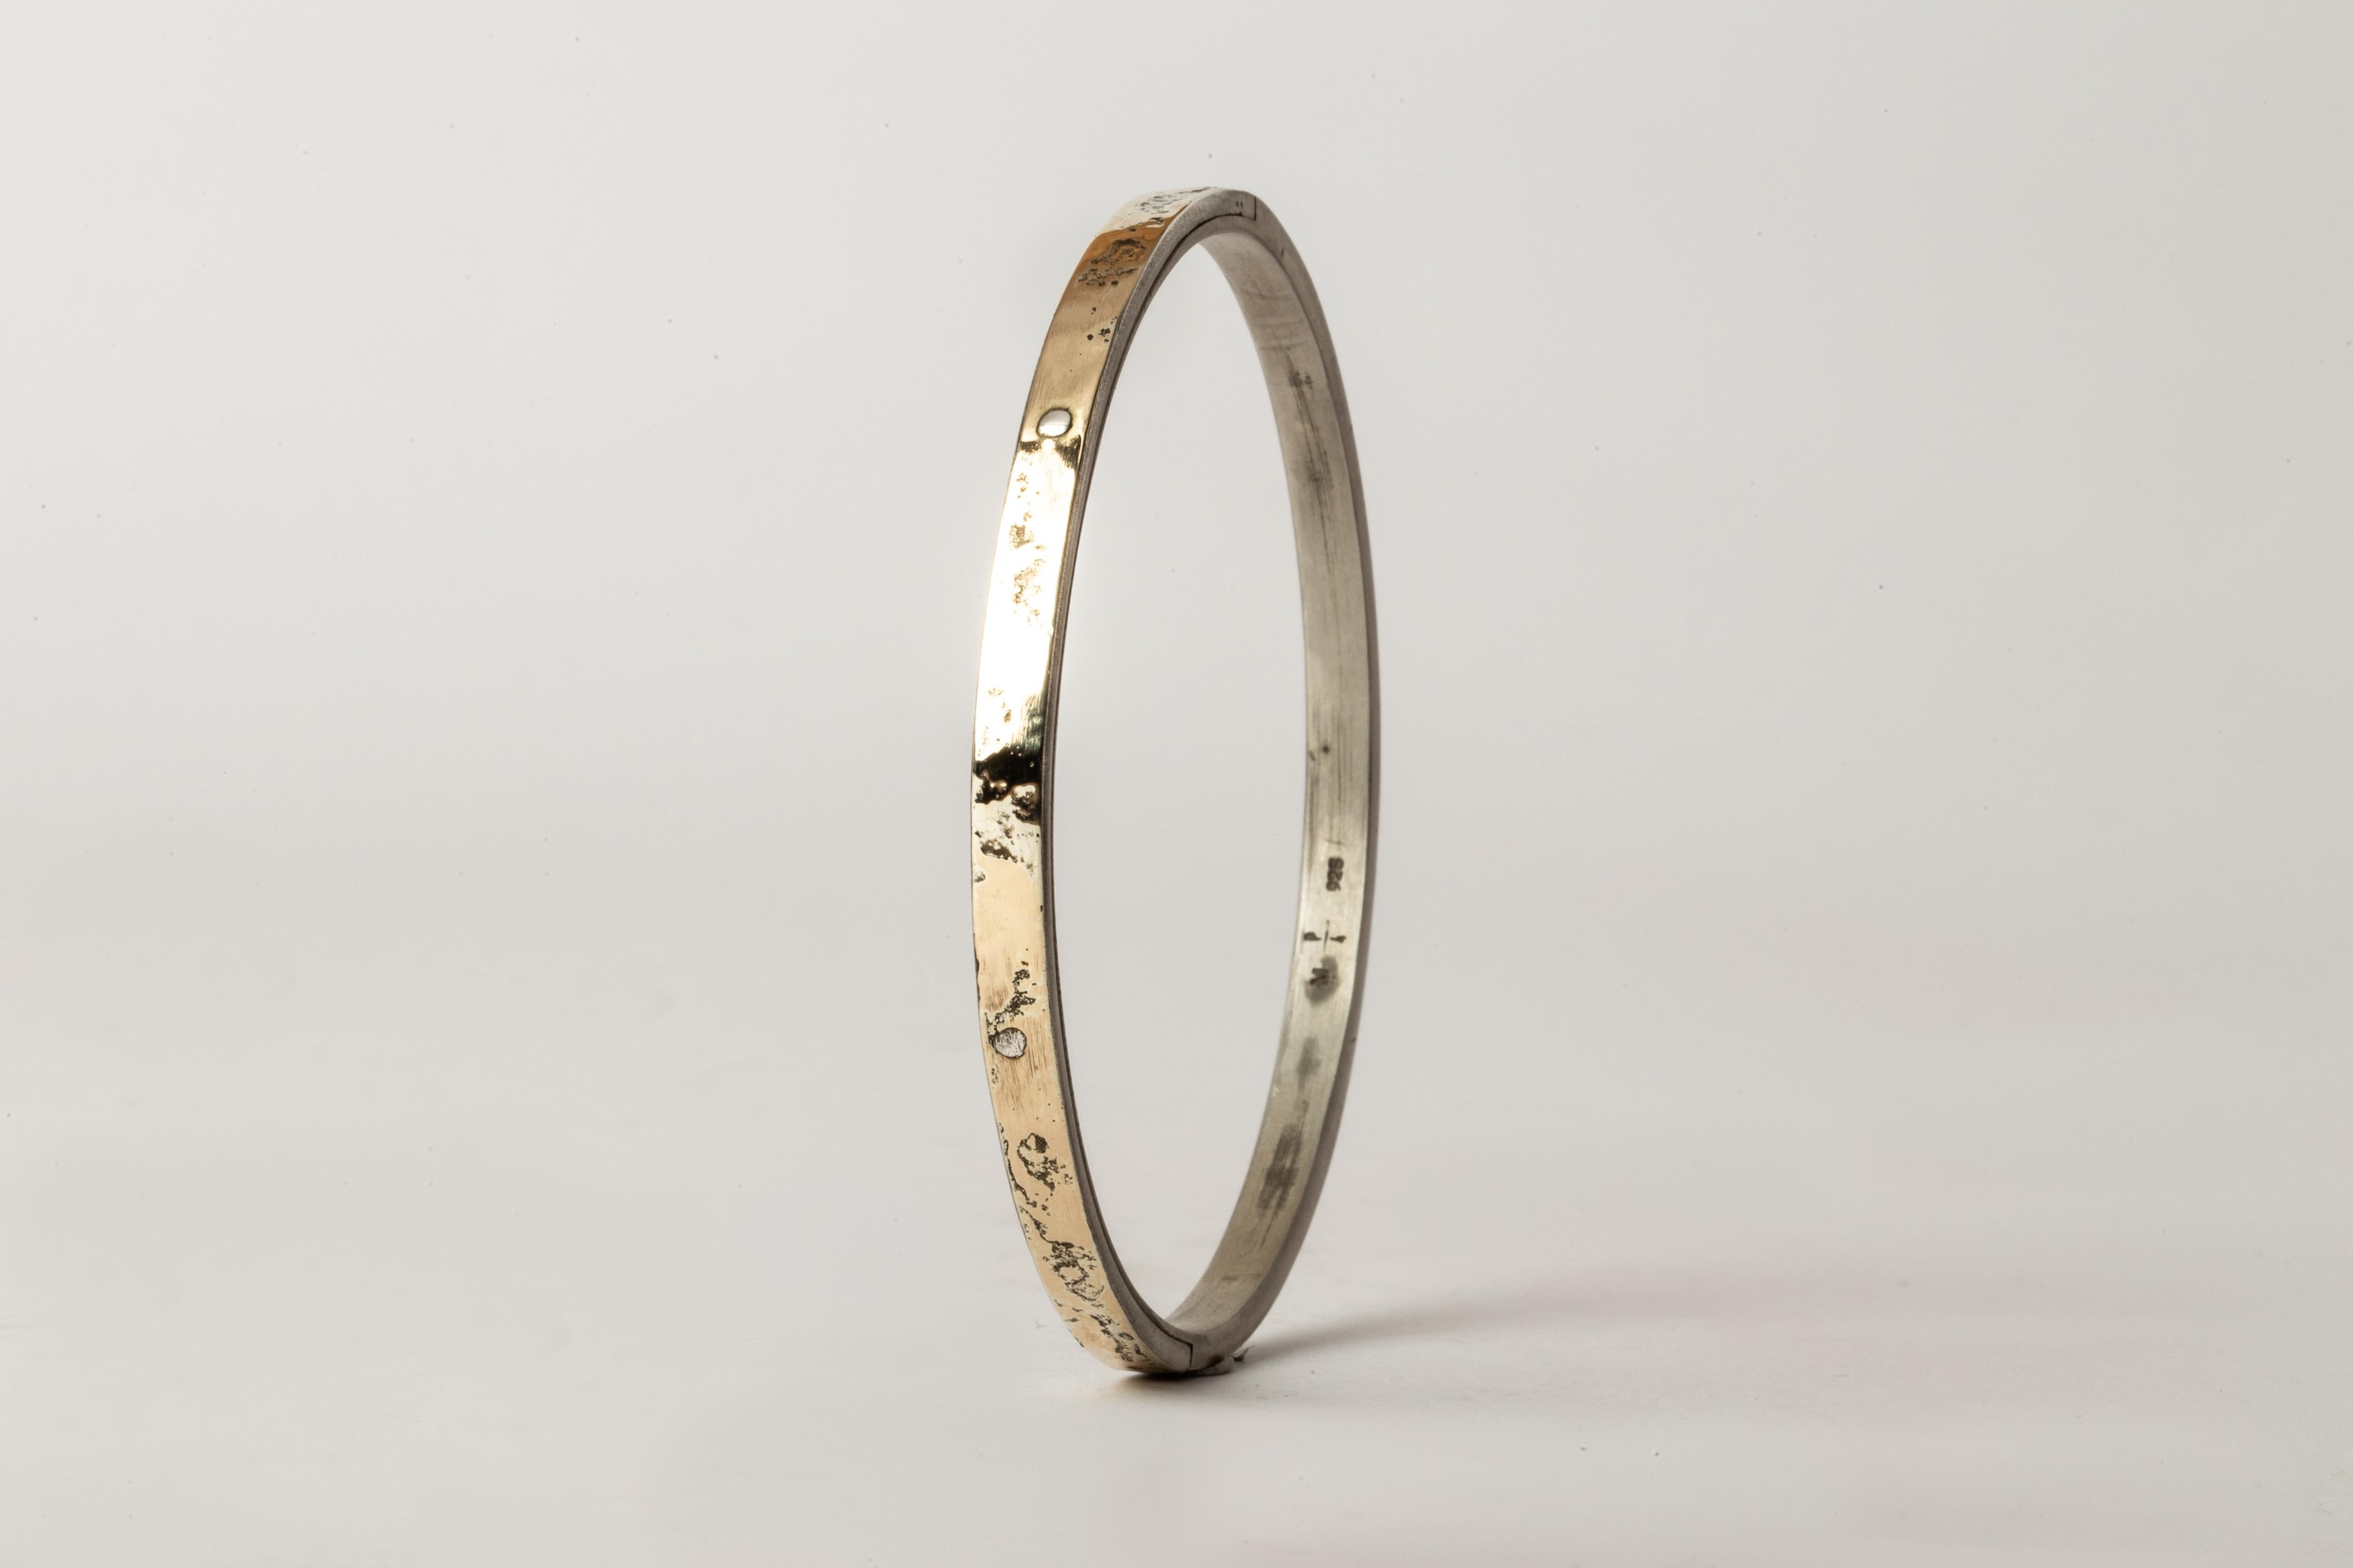 Bracelet in acid treated sterling silver with fused layer of 18k yellow gold.
The Sistema series is first family within Parts of Four. As a mode of creation it expresses the core principle of P/4 which is modularity. The 